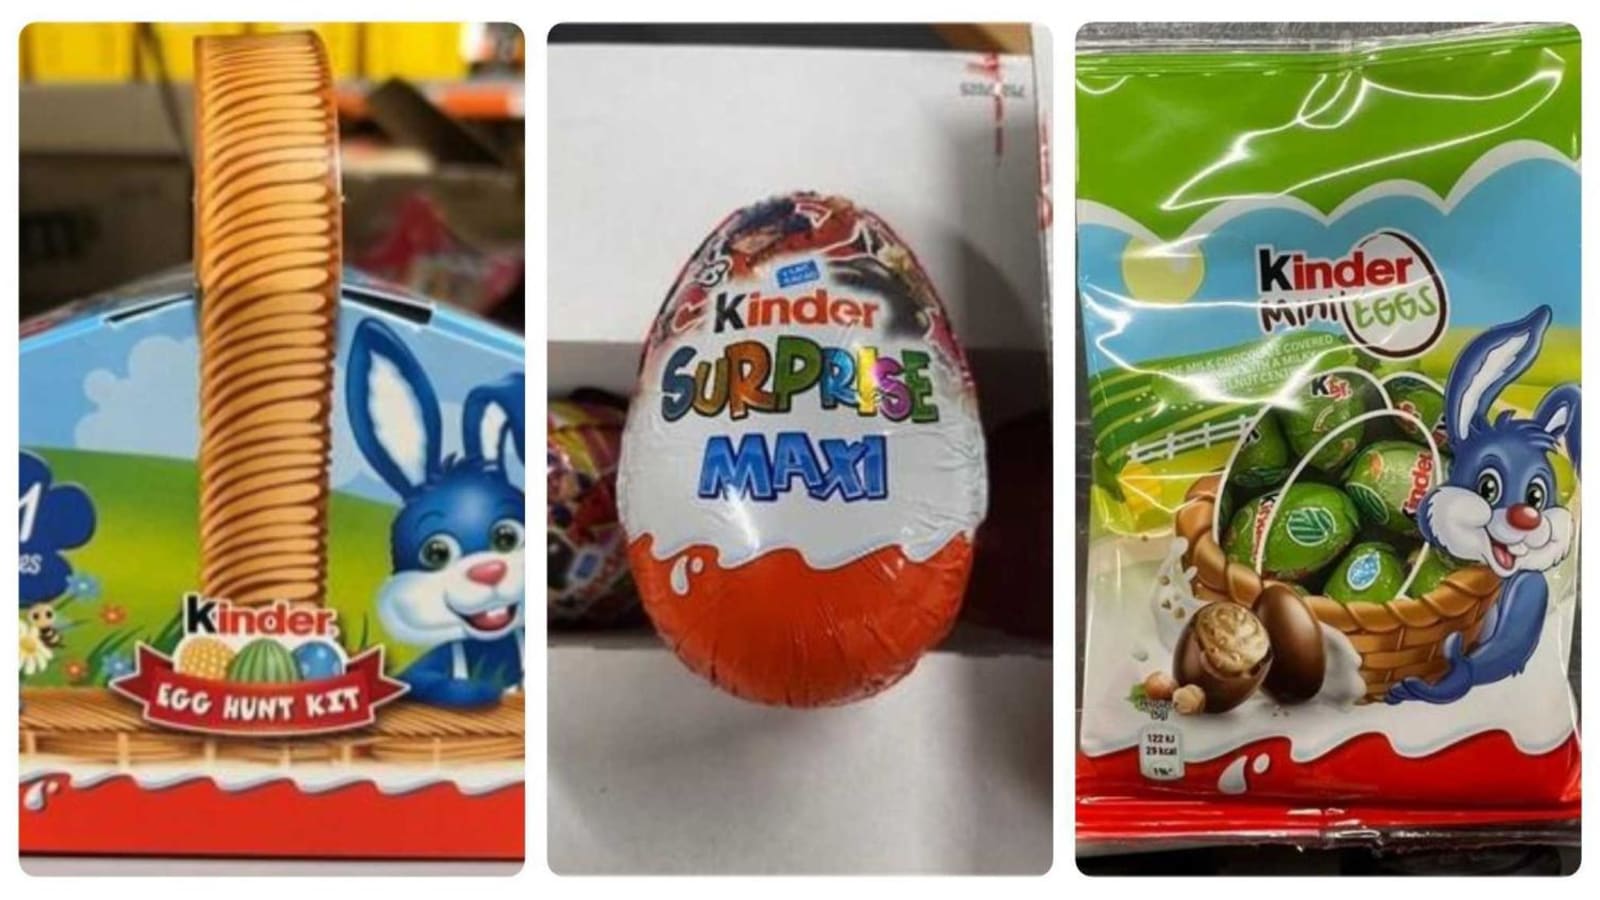 singapore-recalls-three-more-kinder-chocolate-products-due-to-possible-presence-of-salmonella